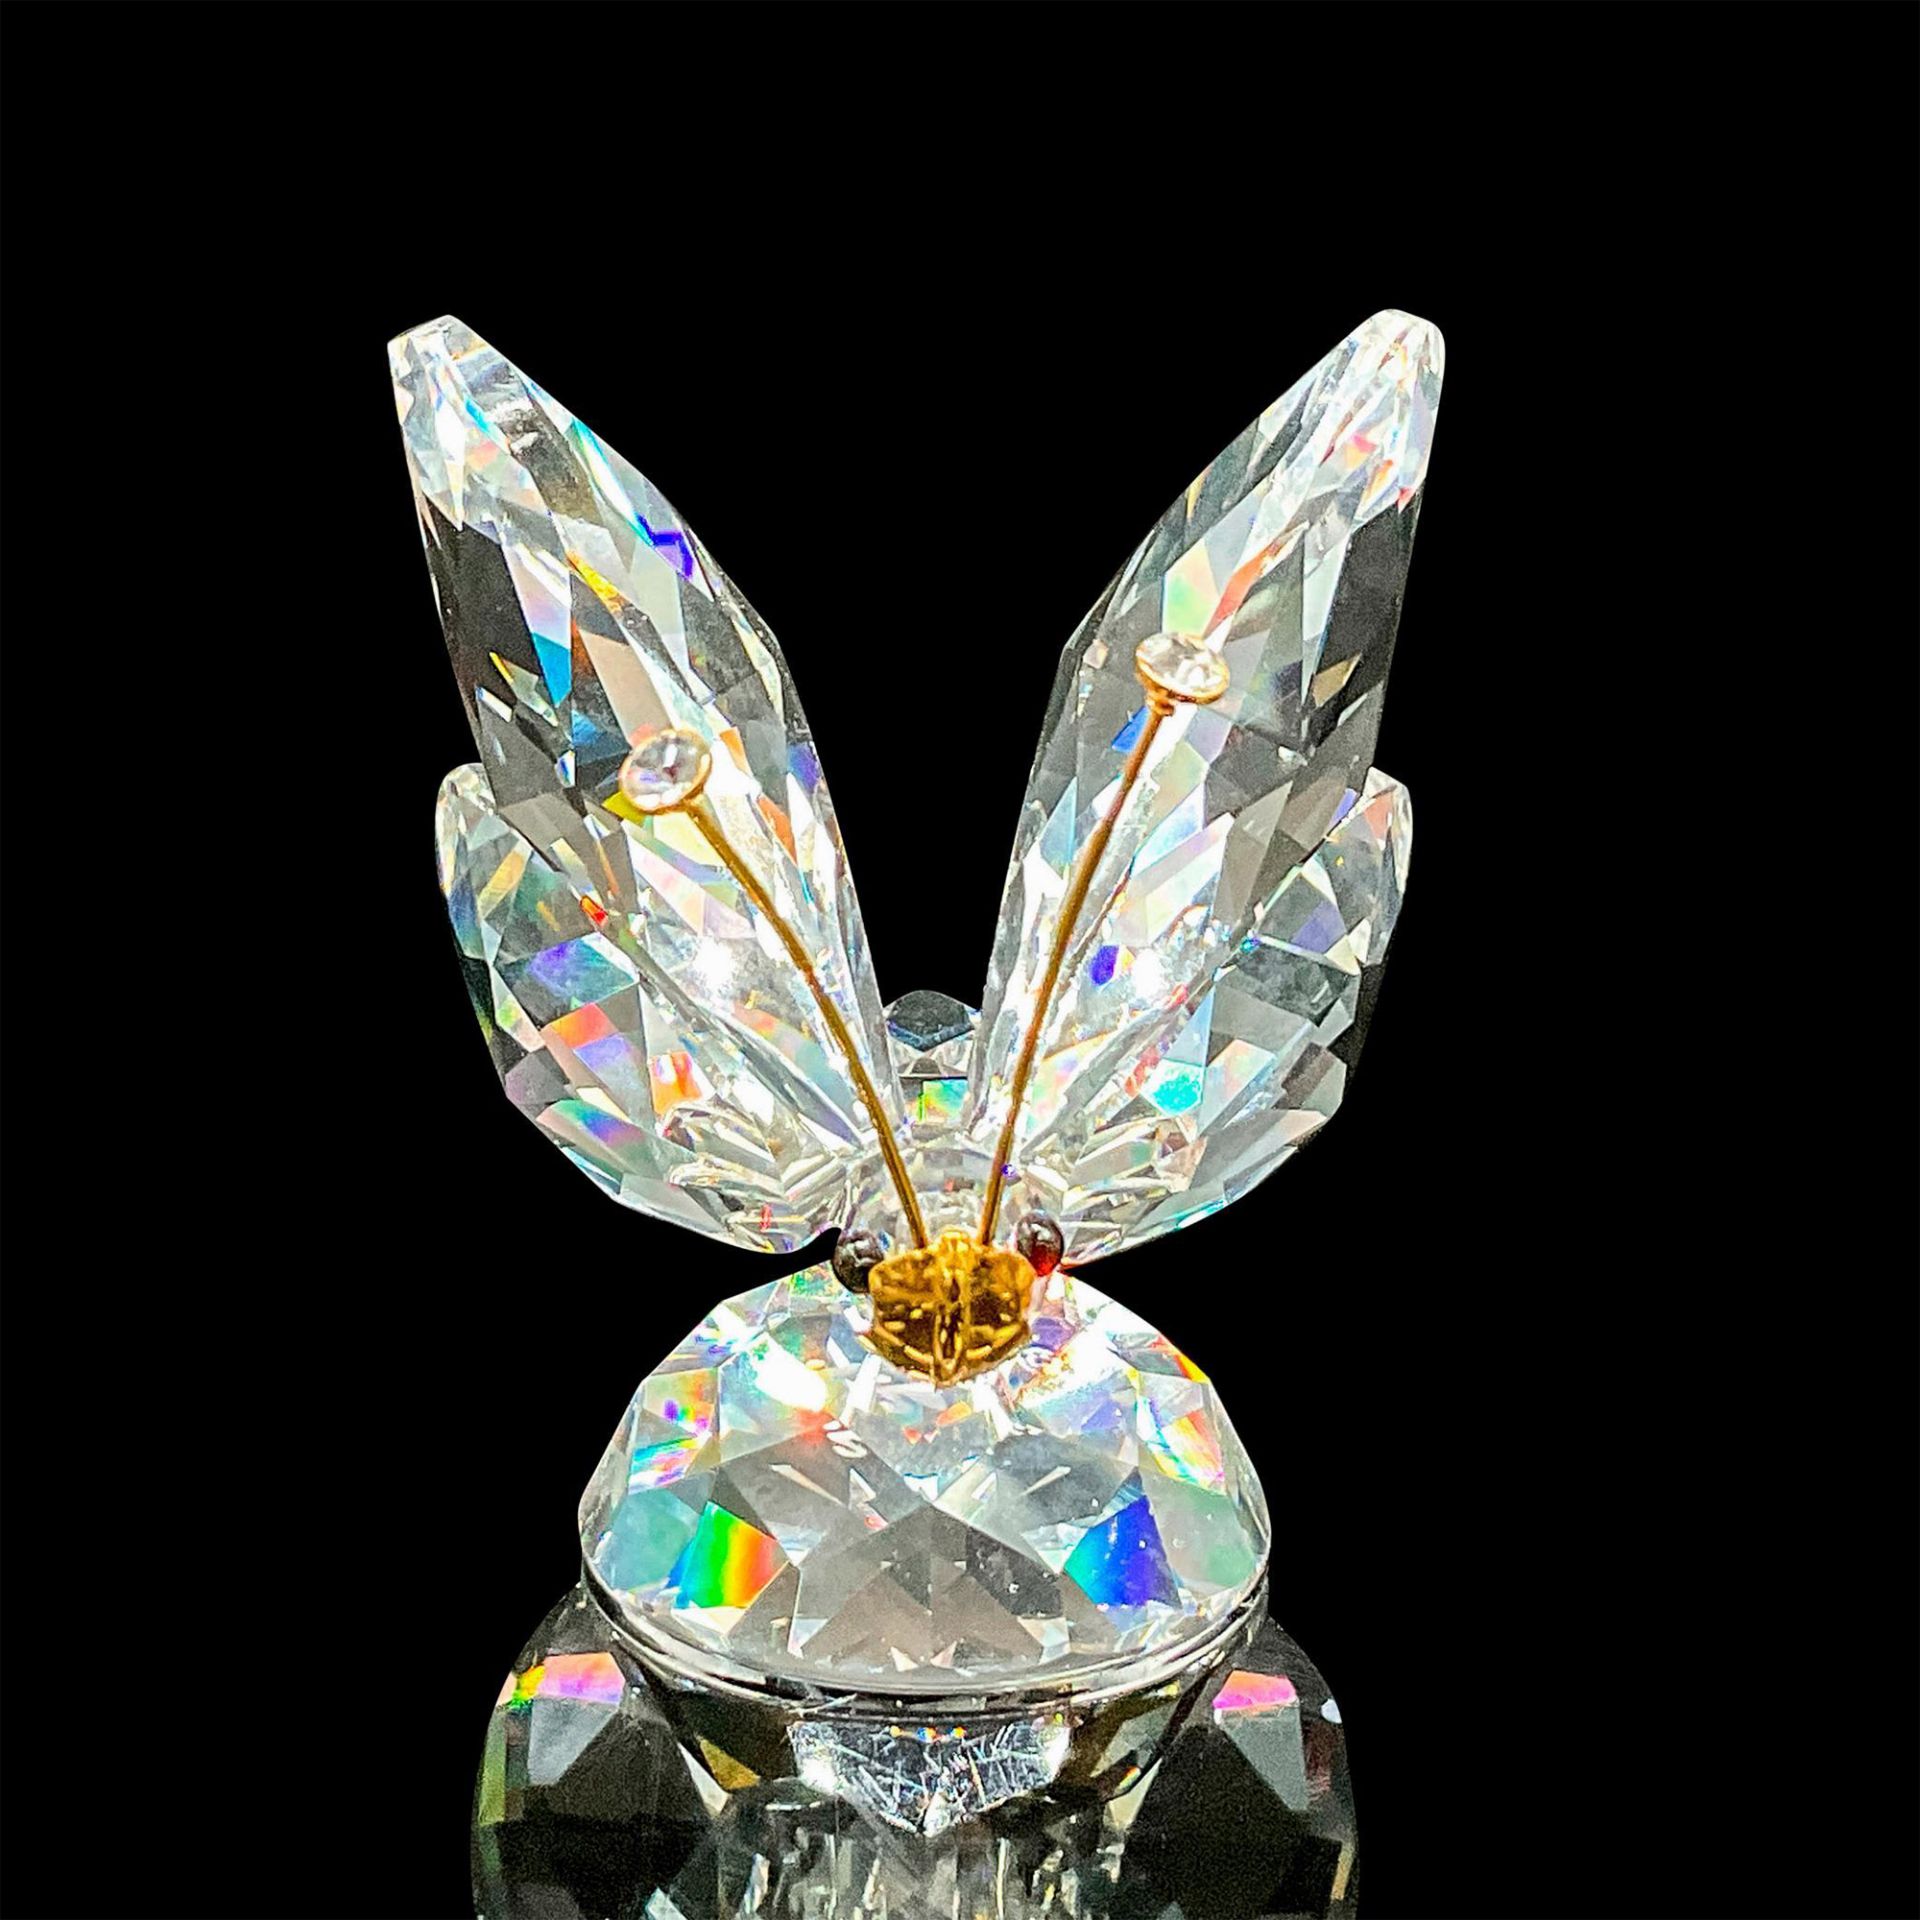 Swarovski Crystal Figurine, Butterfly with Gold Antennae - Image 2 of 5